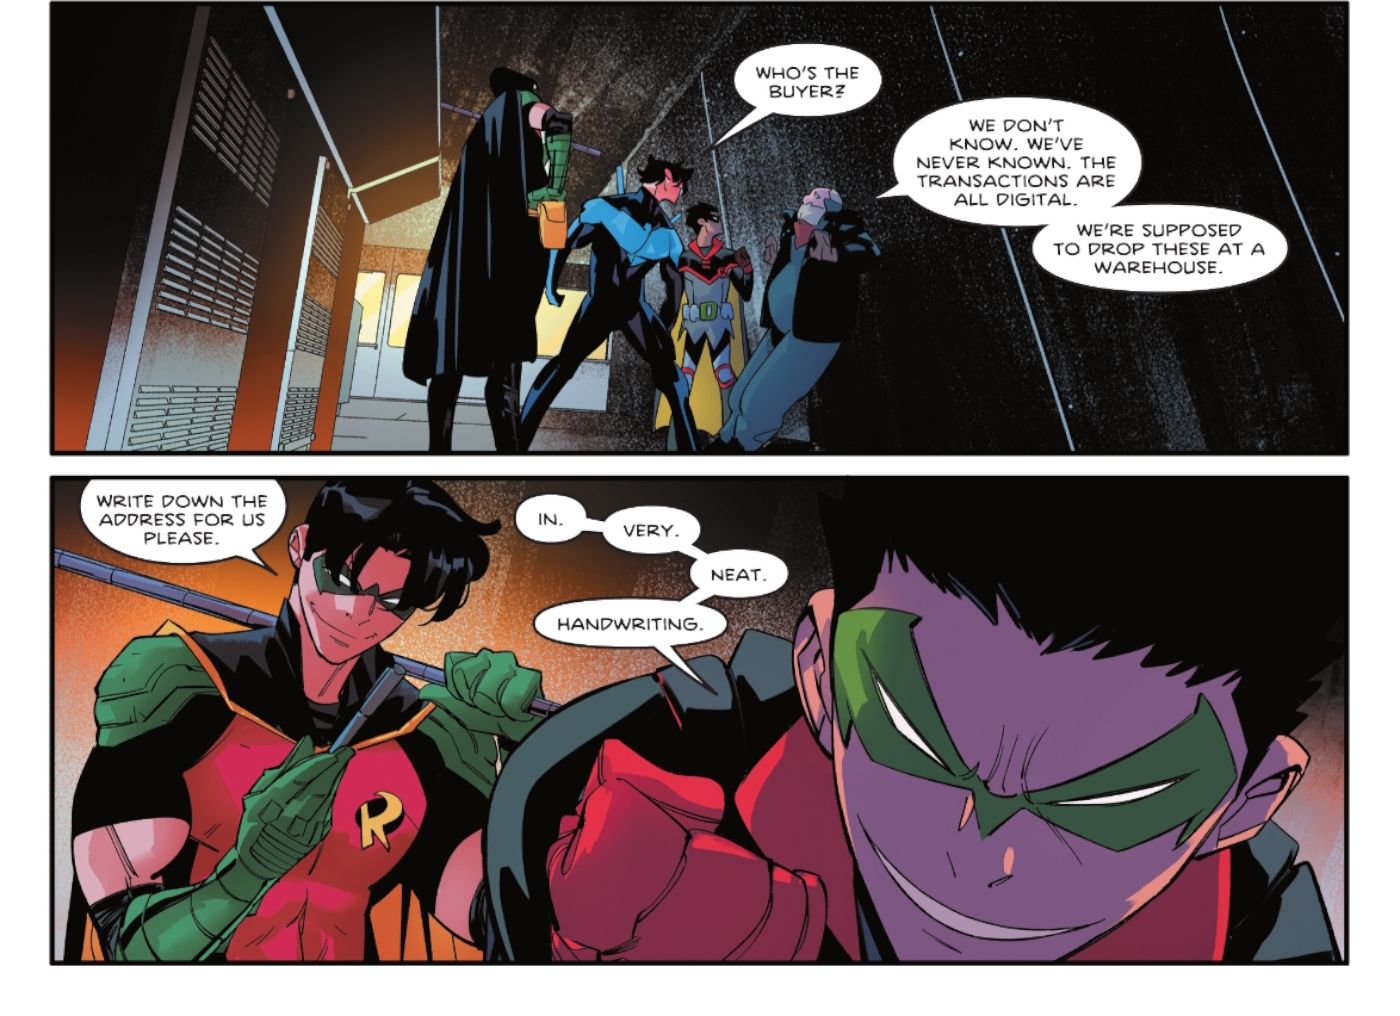 Comic book panels: Damian And Tim Robins Interrogate A Criminal While NIghtwing Watches